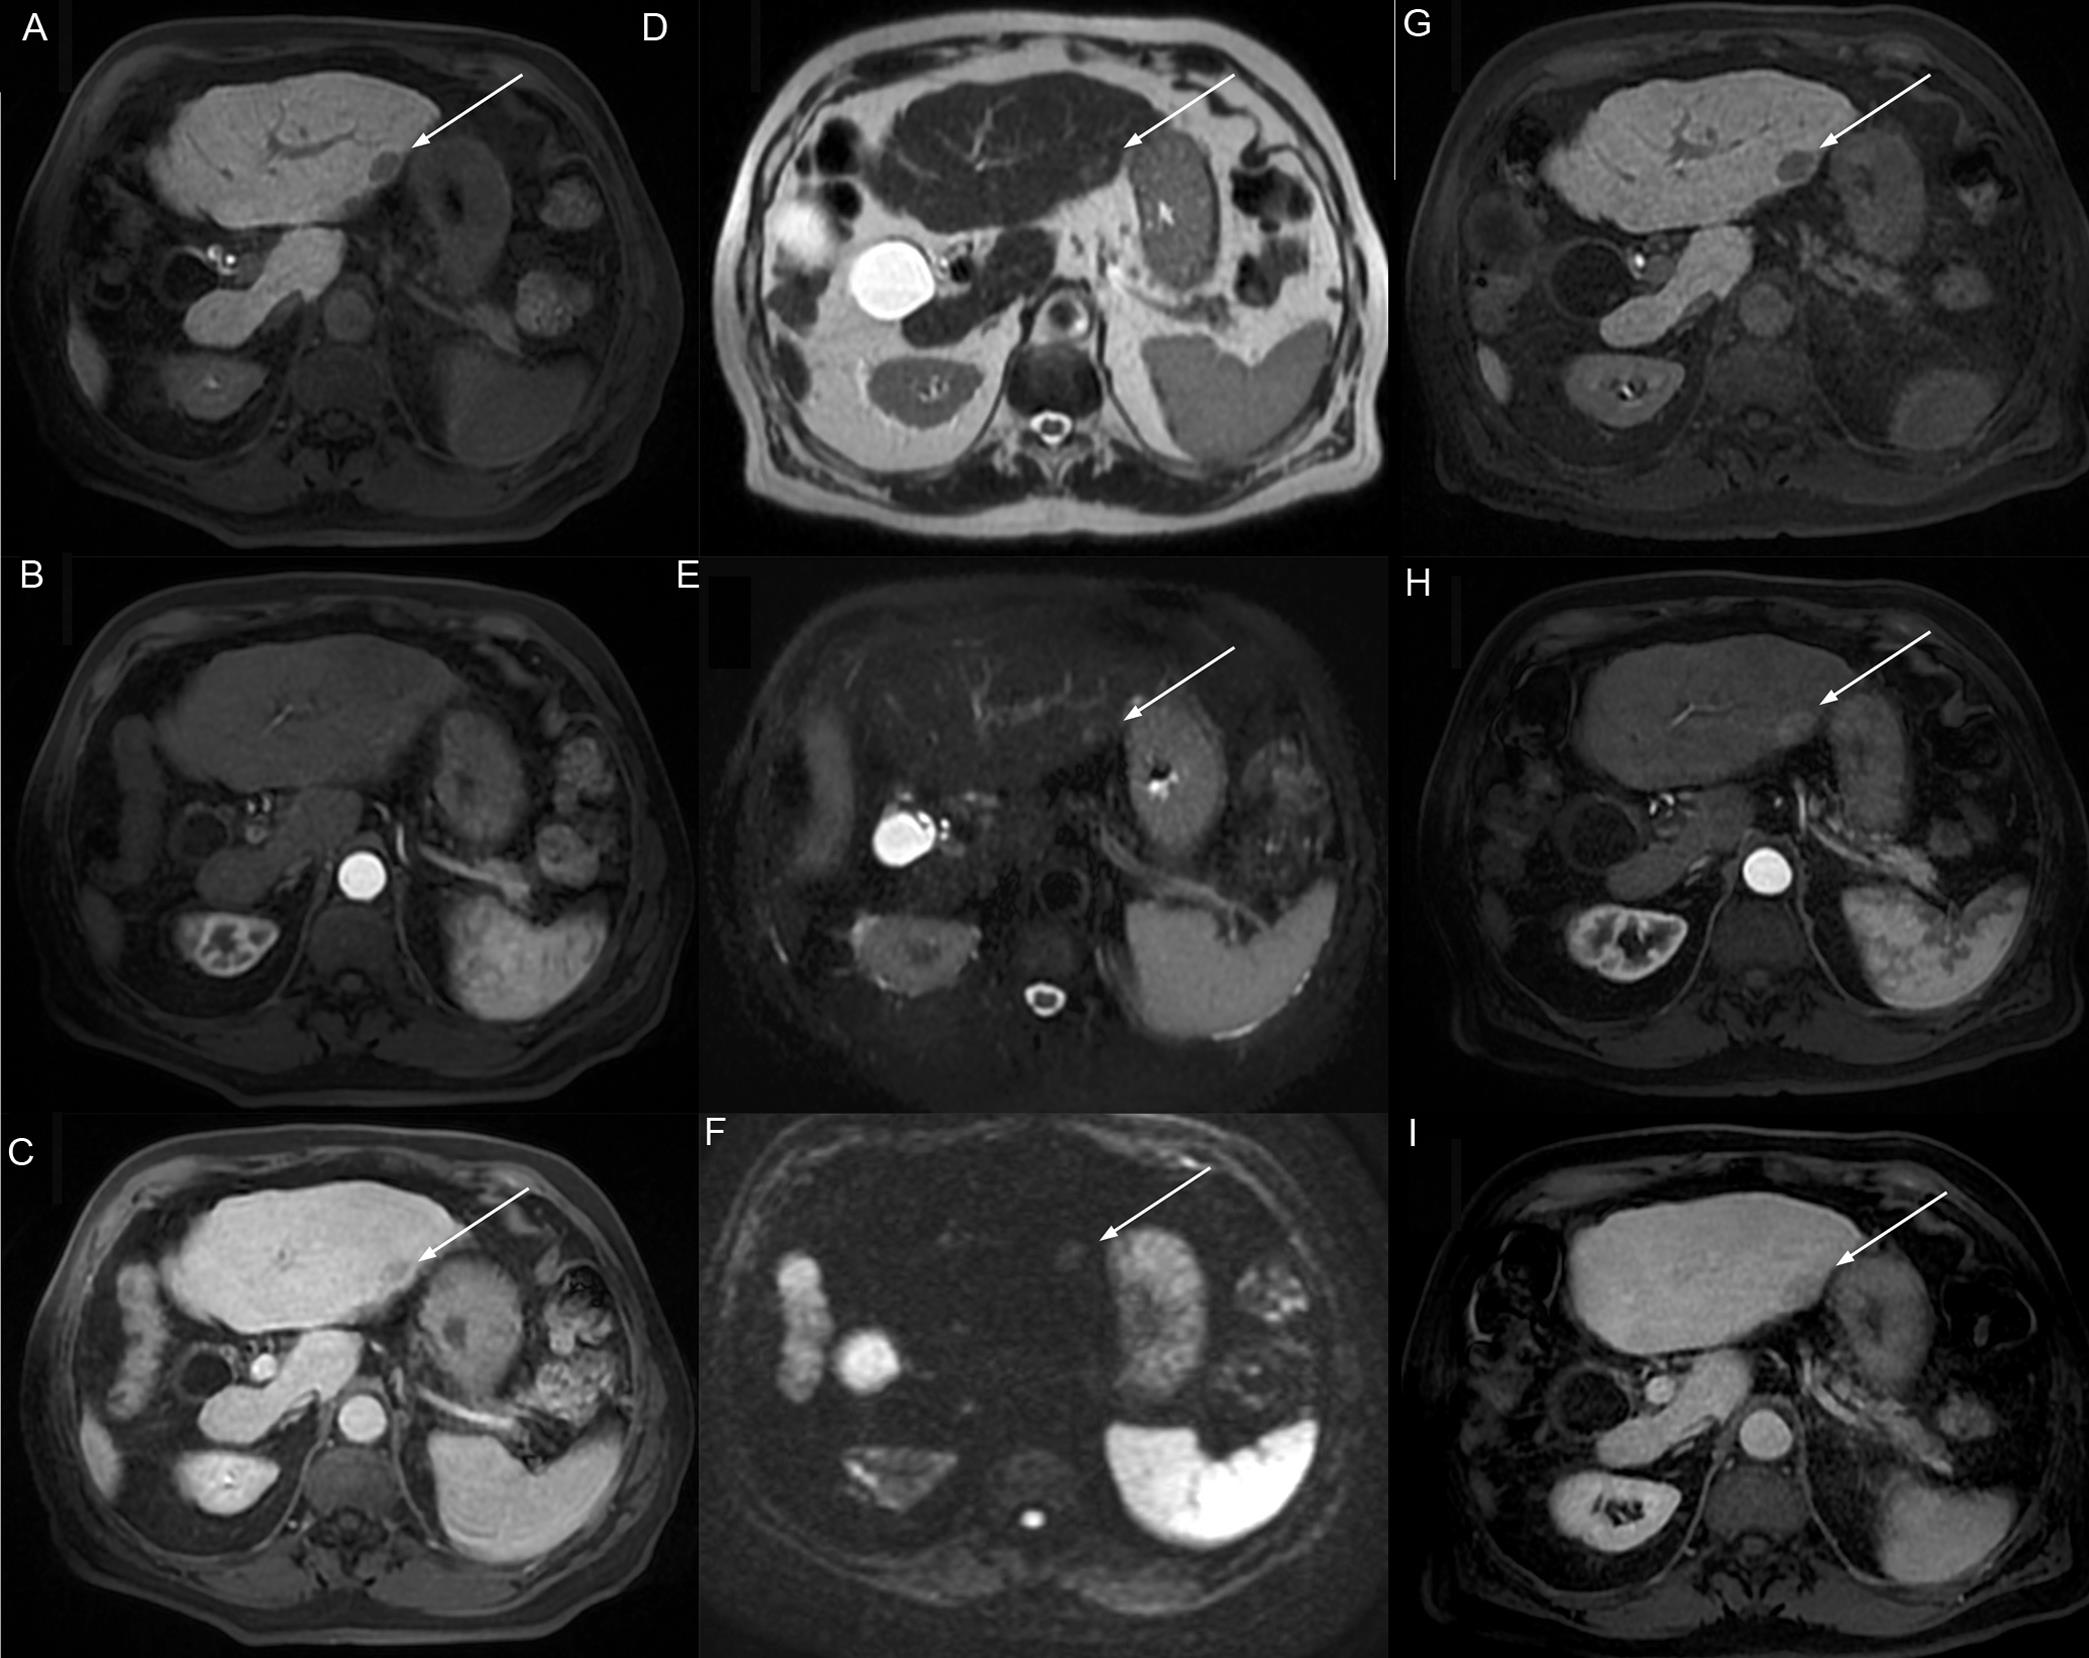 Axial MR images demonstrate a 17 mm nodule in the liver segment 2.